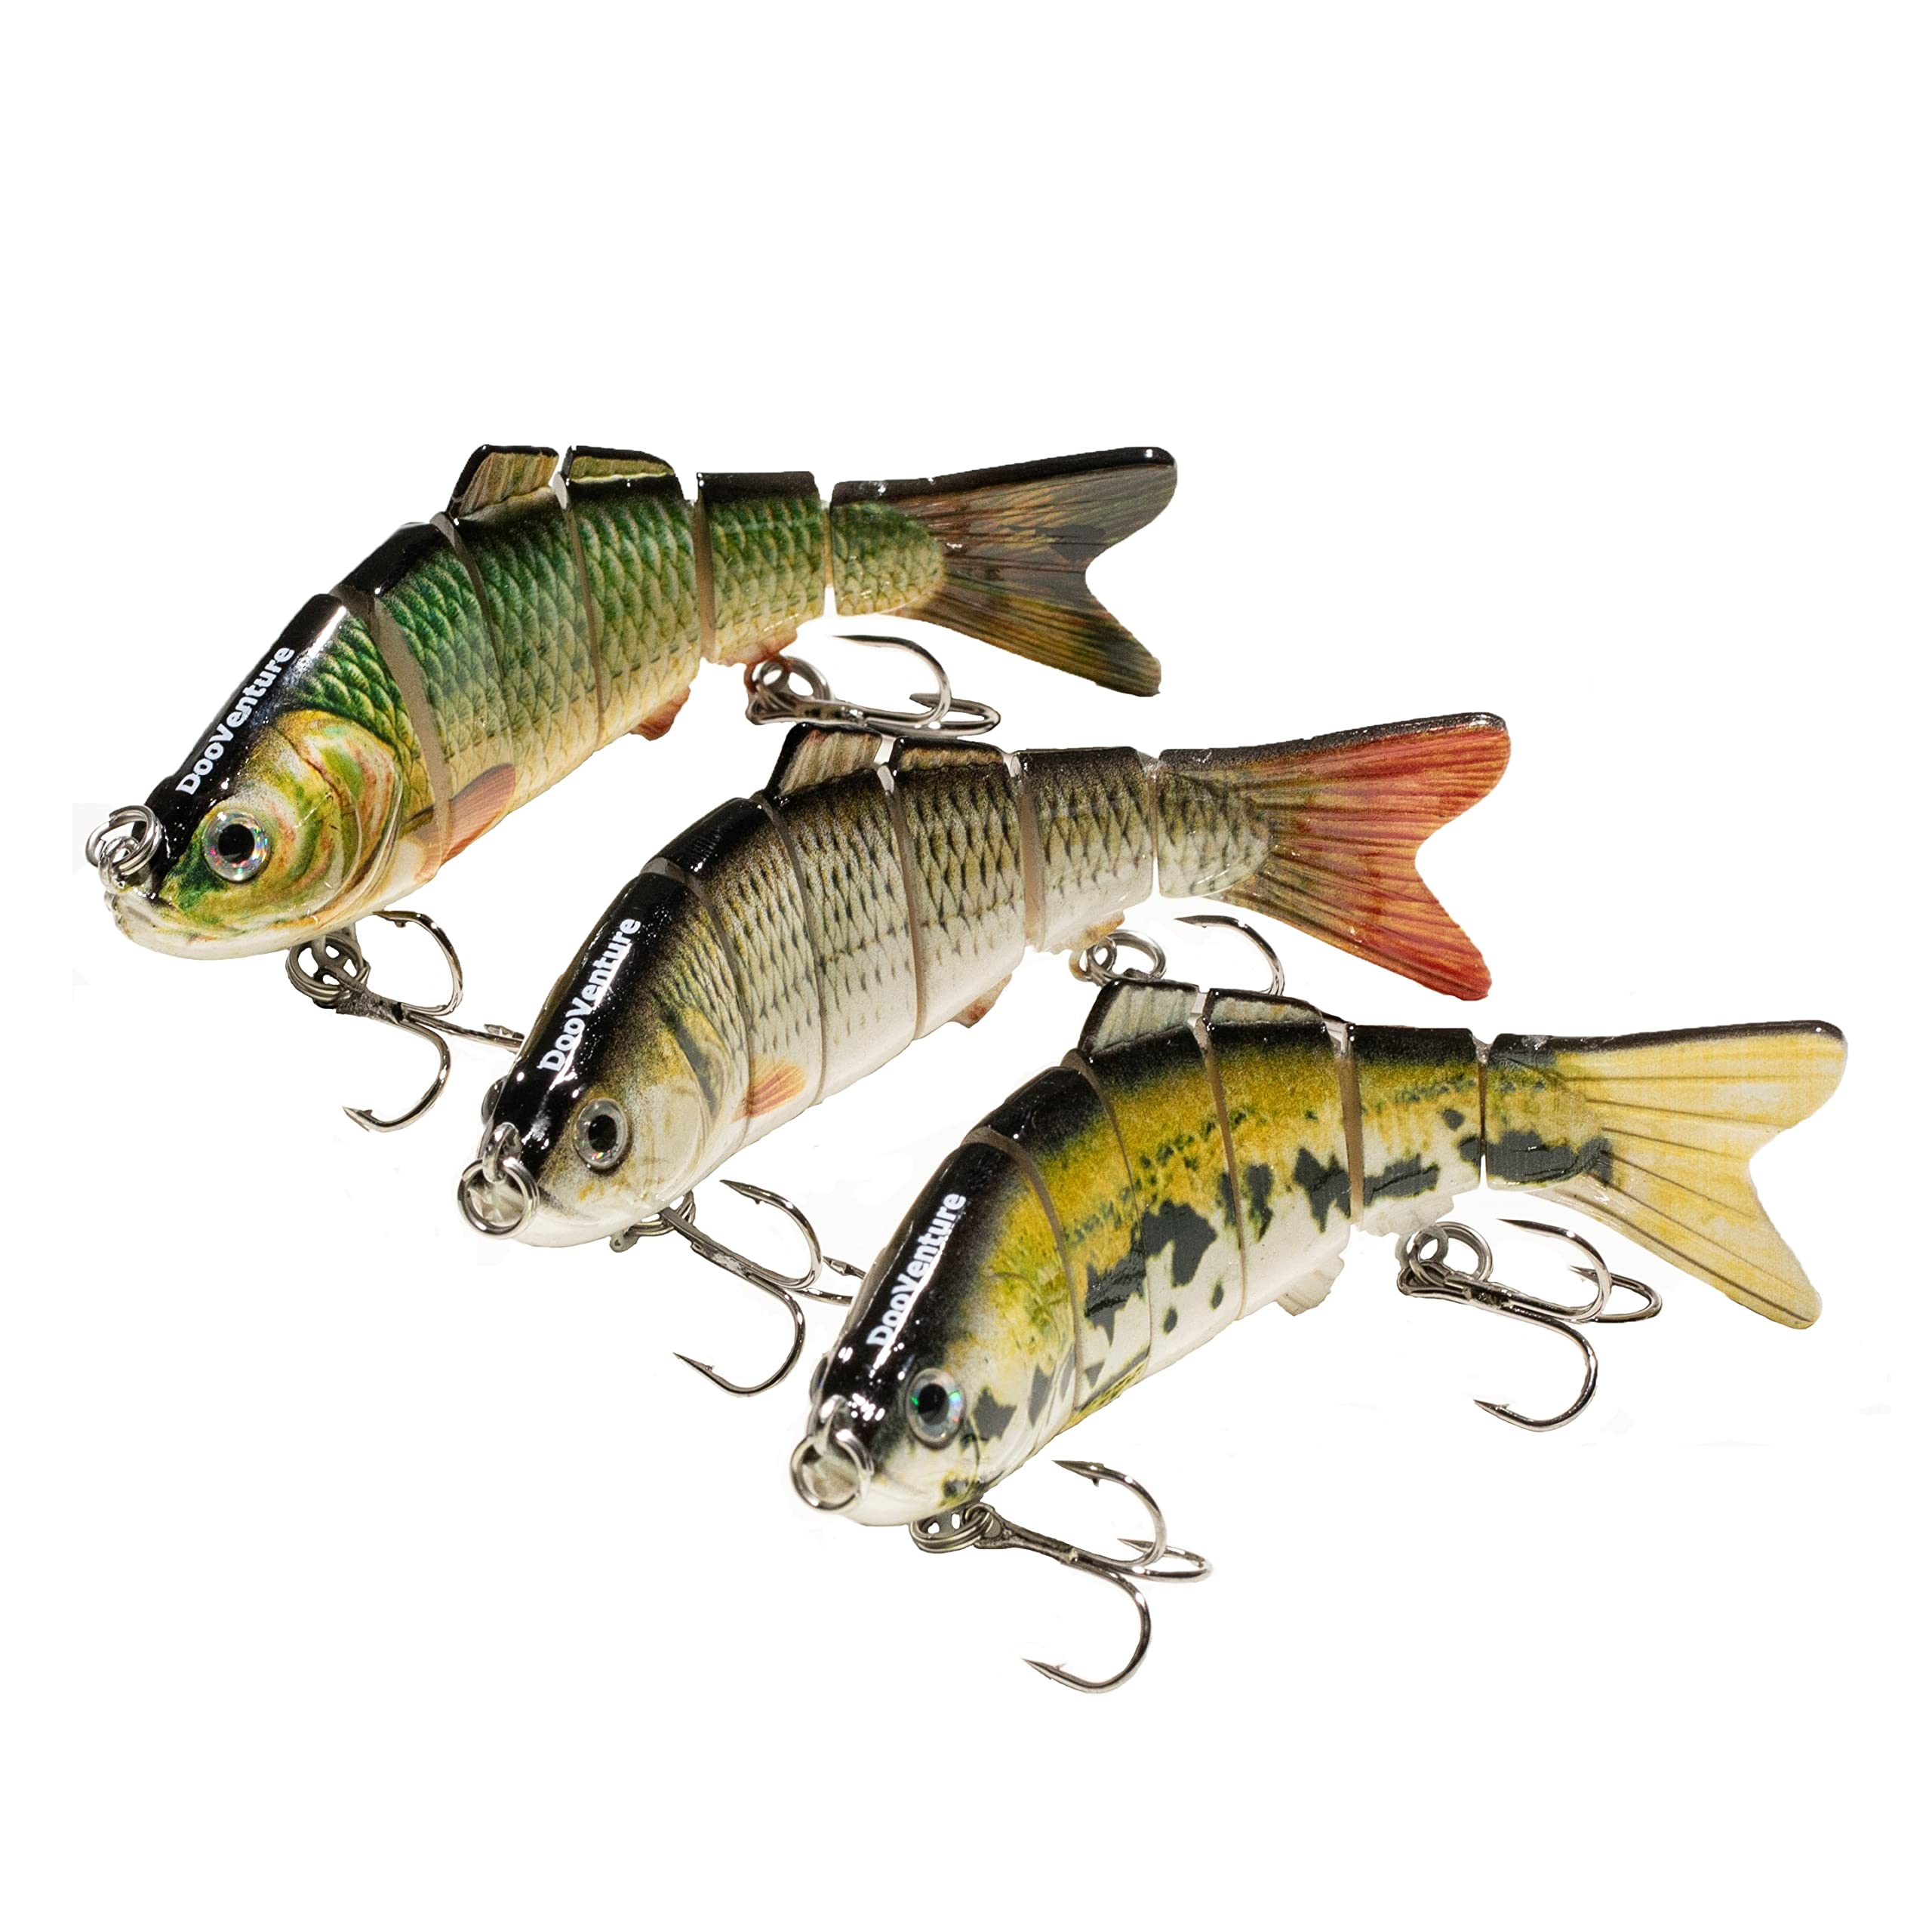 10cm 22g Sinking Wobblers 4 Segments Fishing Lures Multi Jointed